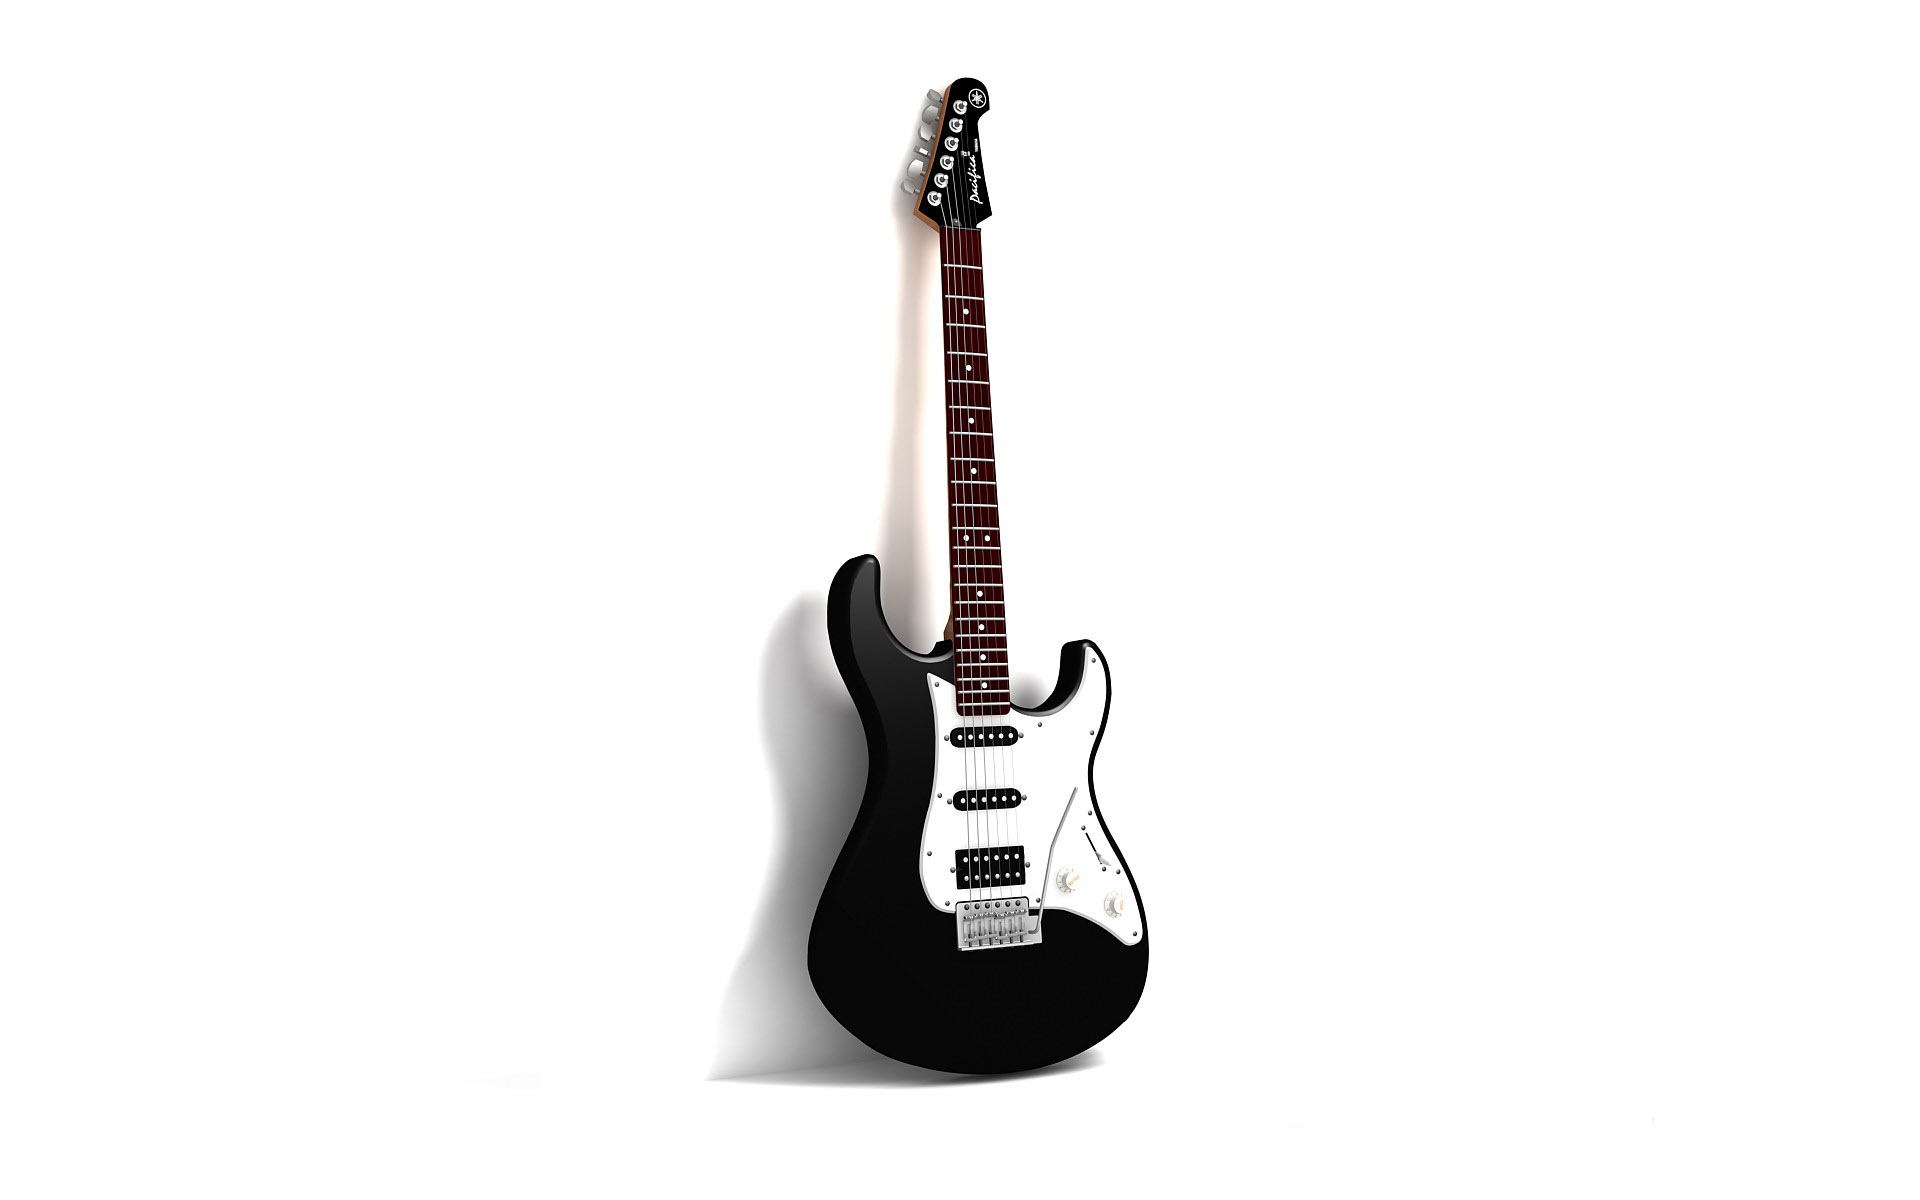 black and white guitar | wallpapers55.com - Best Wallpapers for 